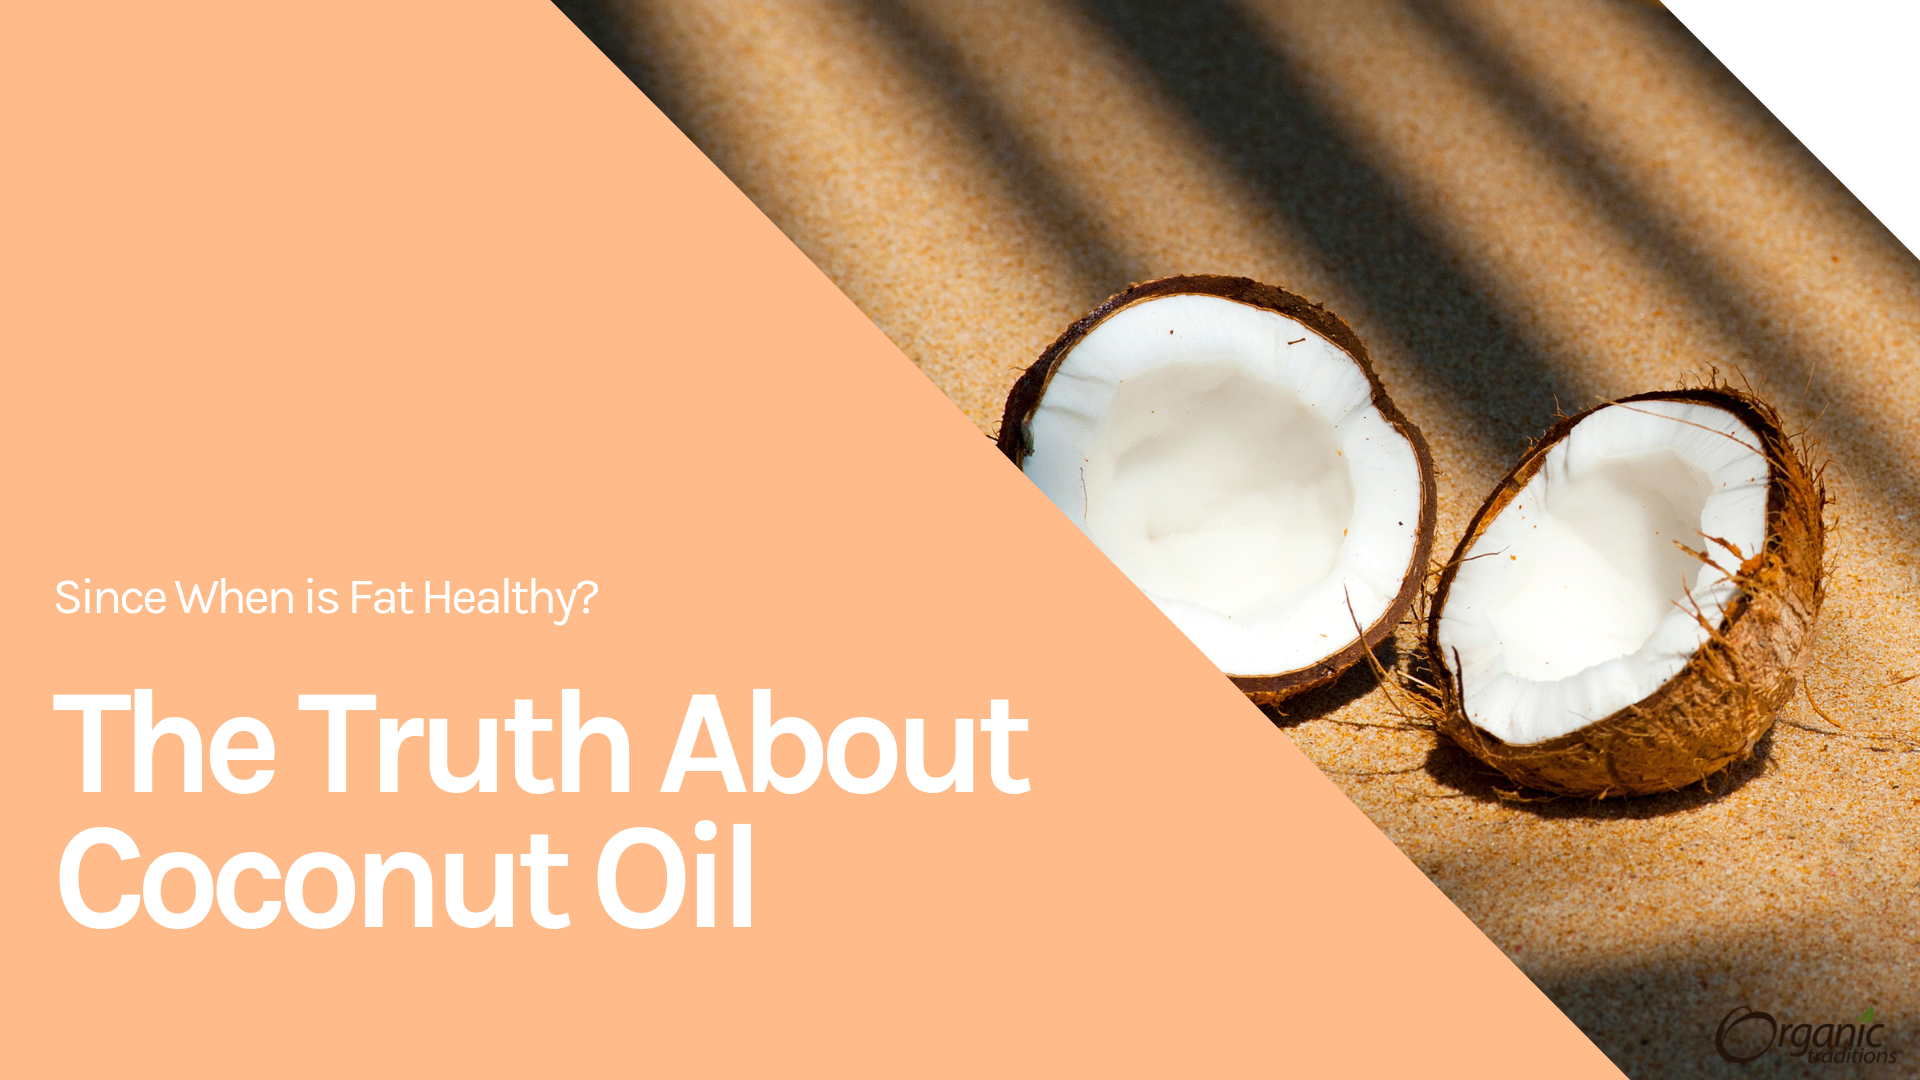 Since When is Fat Healthy? + The Truth About Coconut Oil